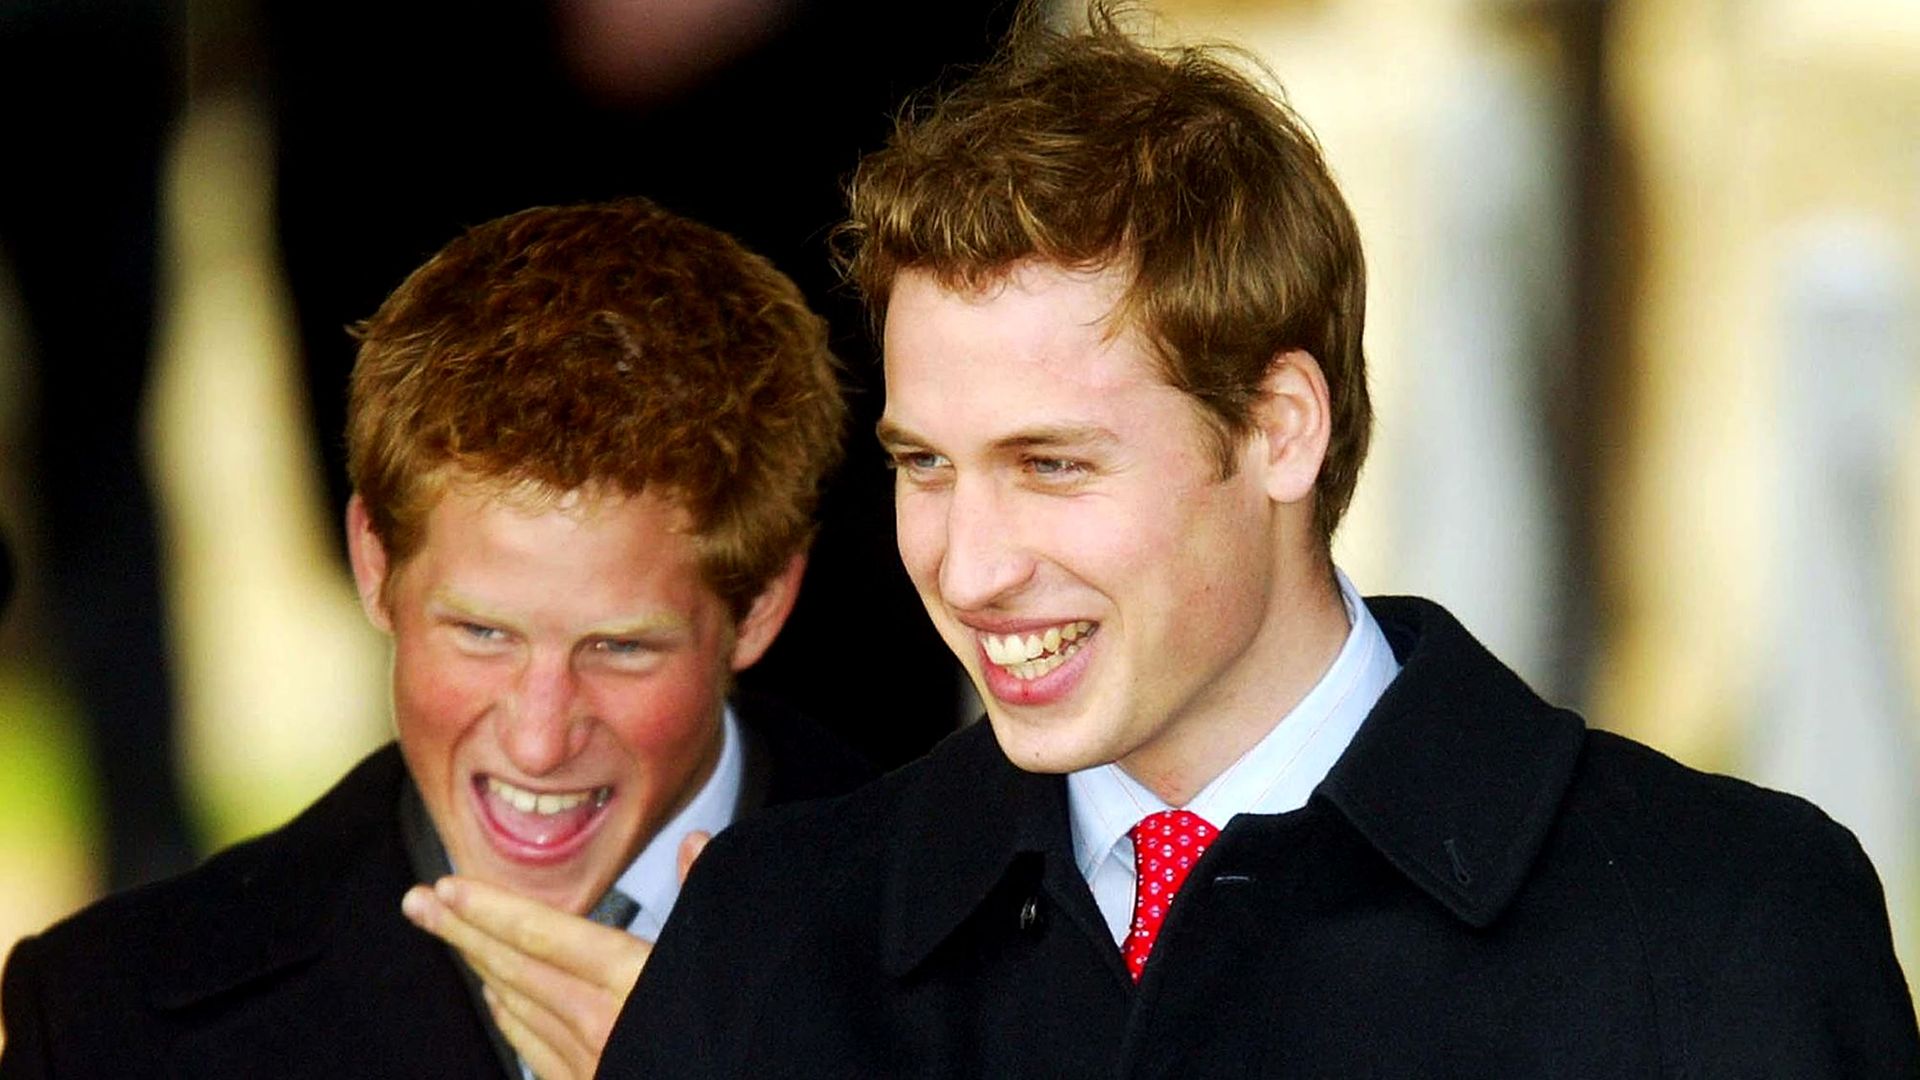 Prince William and Prince Harry laughing